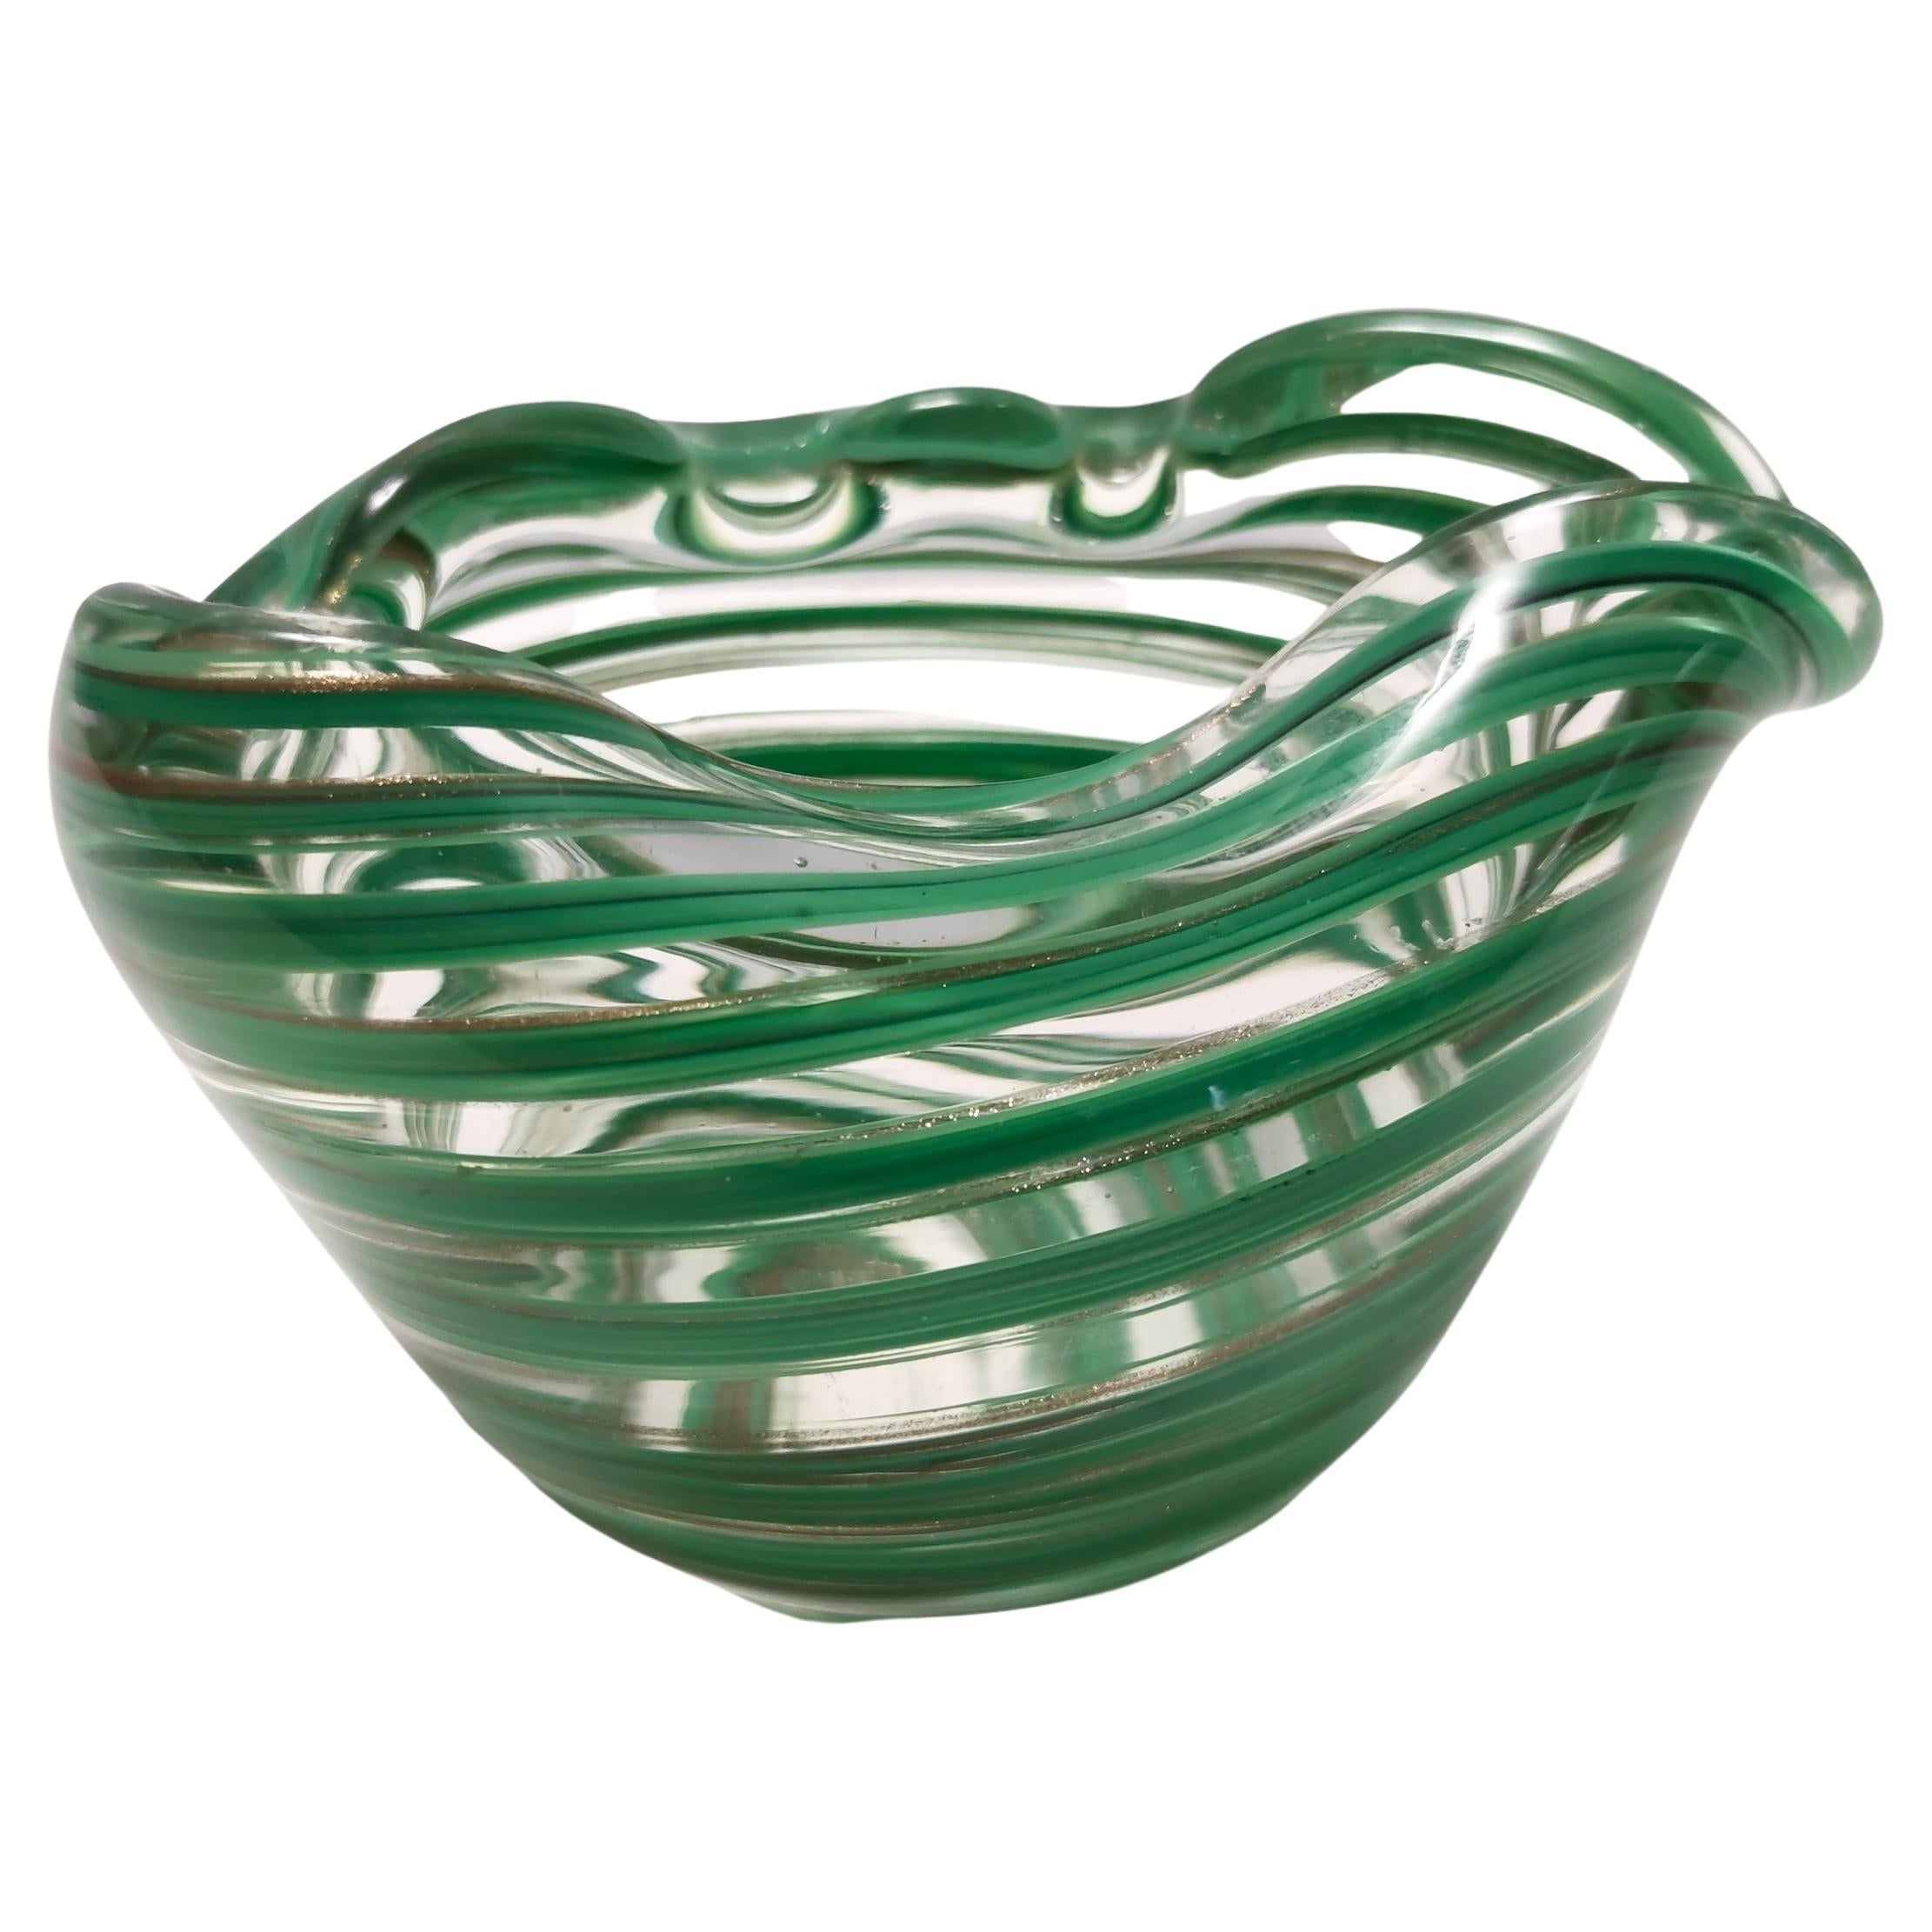 Murano Glass Bowl or Ashtray with Green Canes and Aventurine Glass, Italy